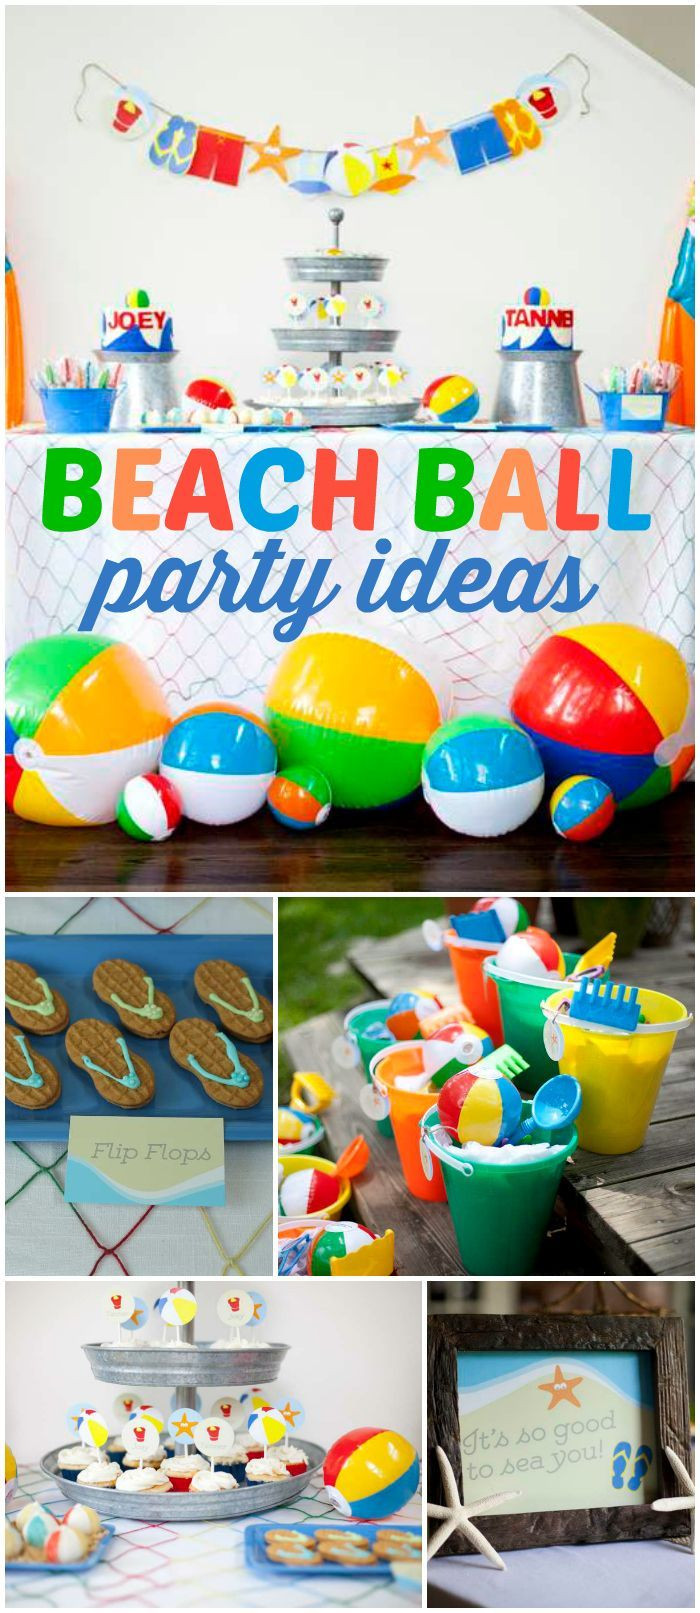 Beach Birthday Party Ideas Kids
 Lots of colorful beach balls are at this fun party See